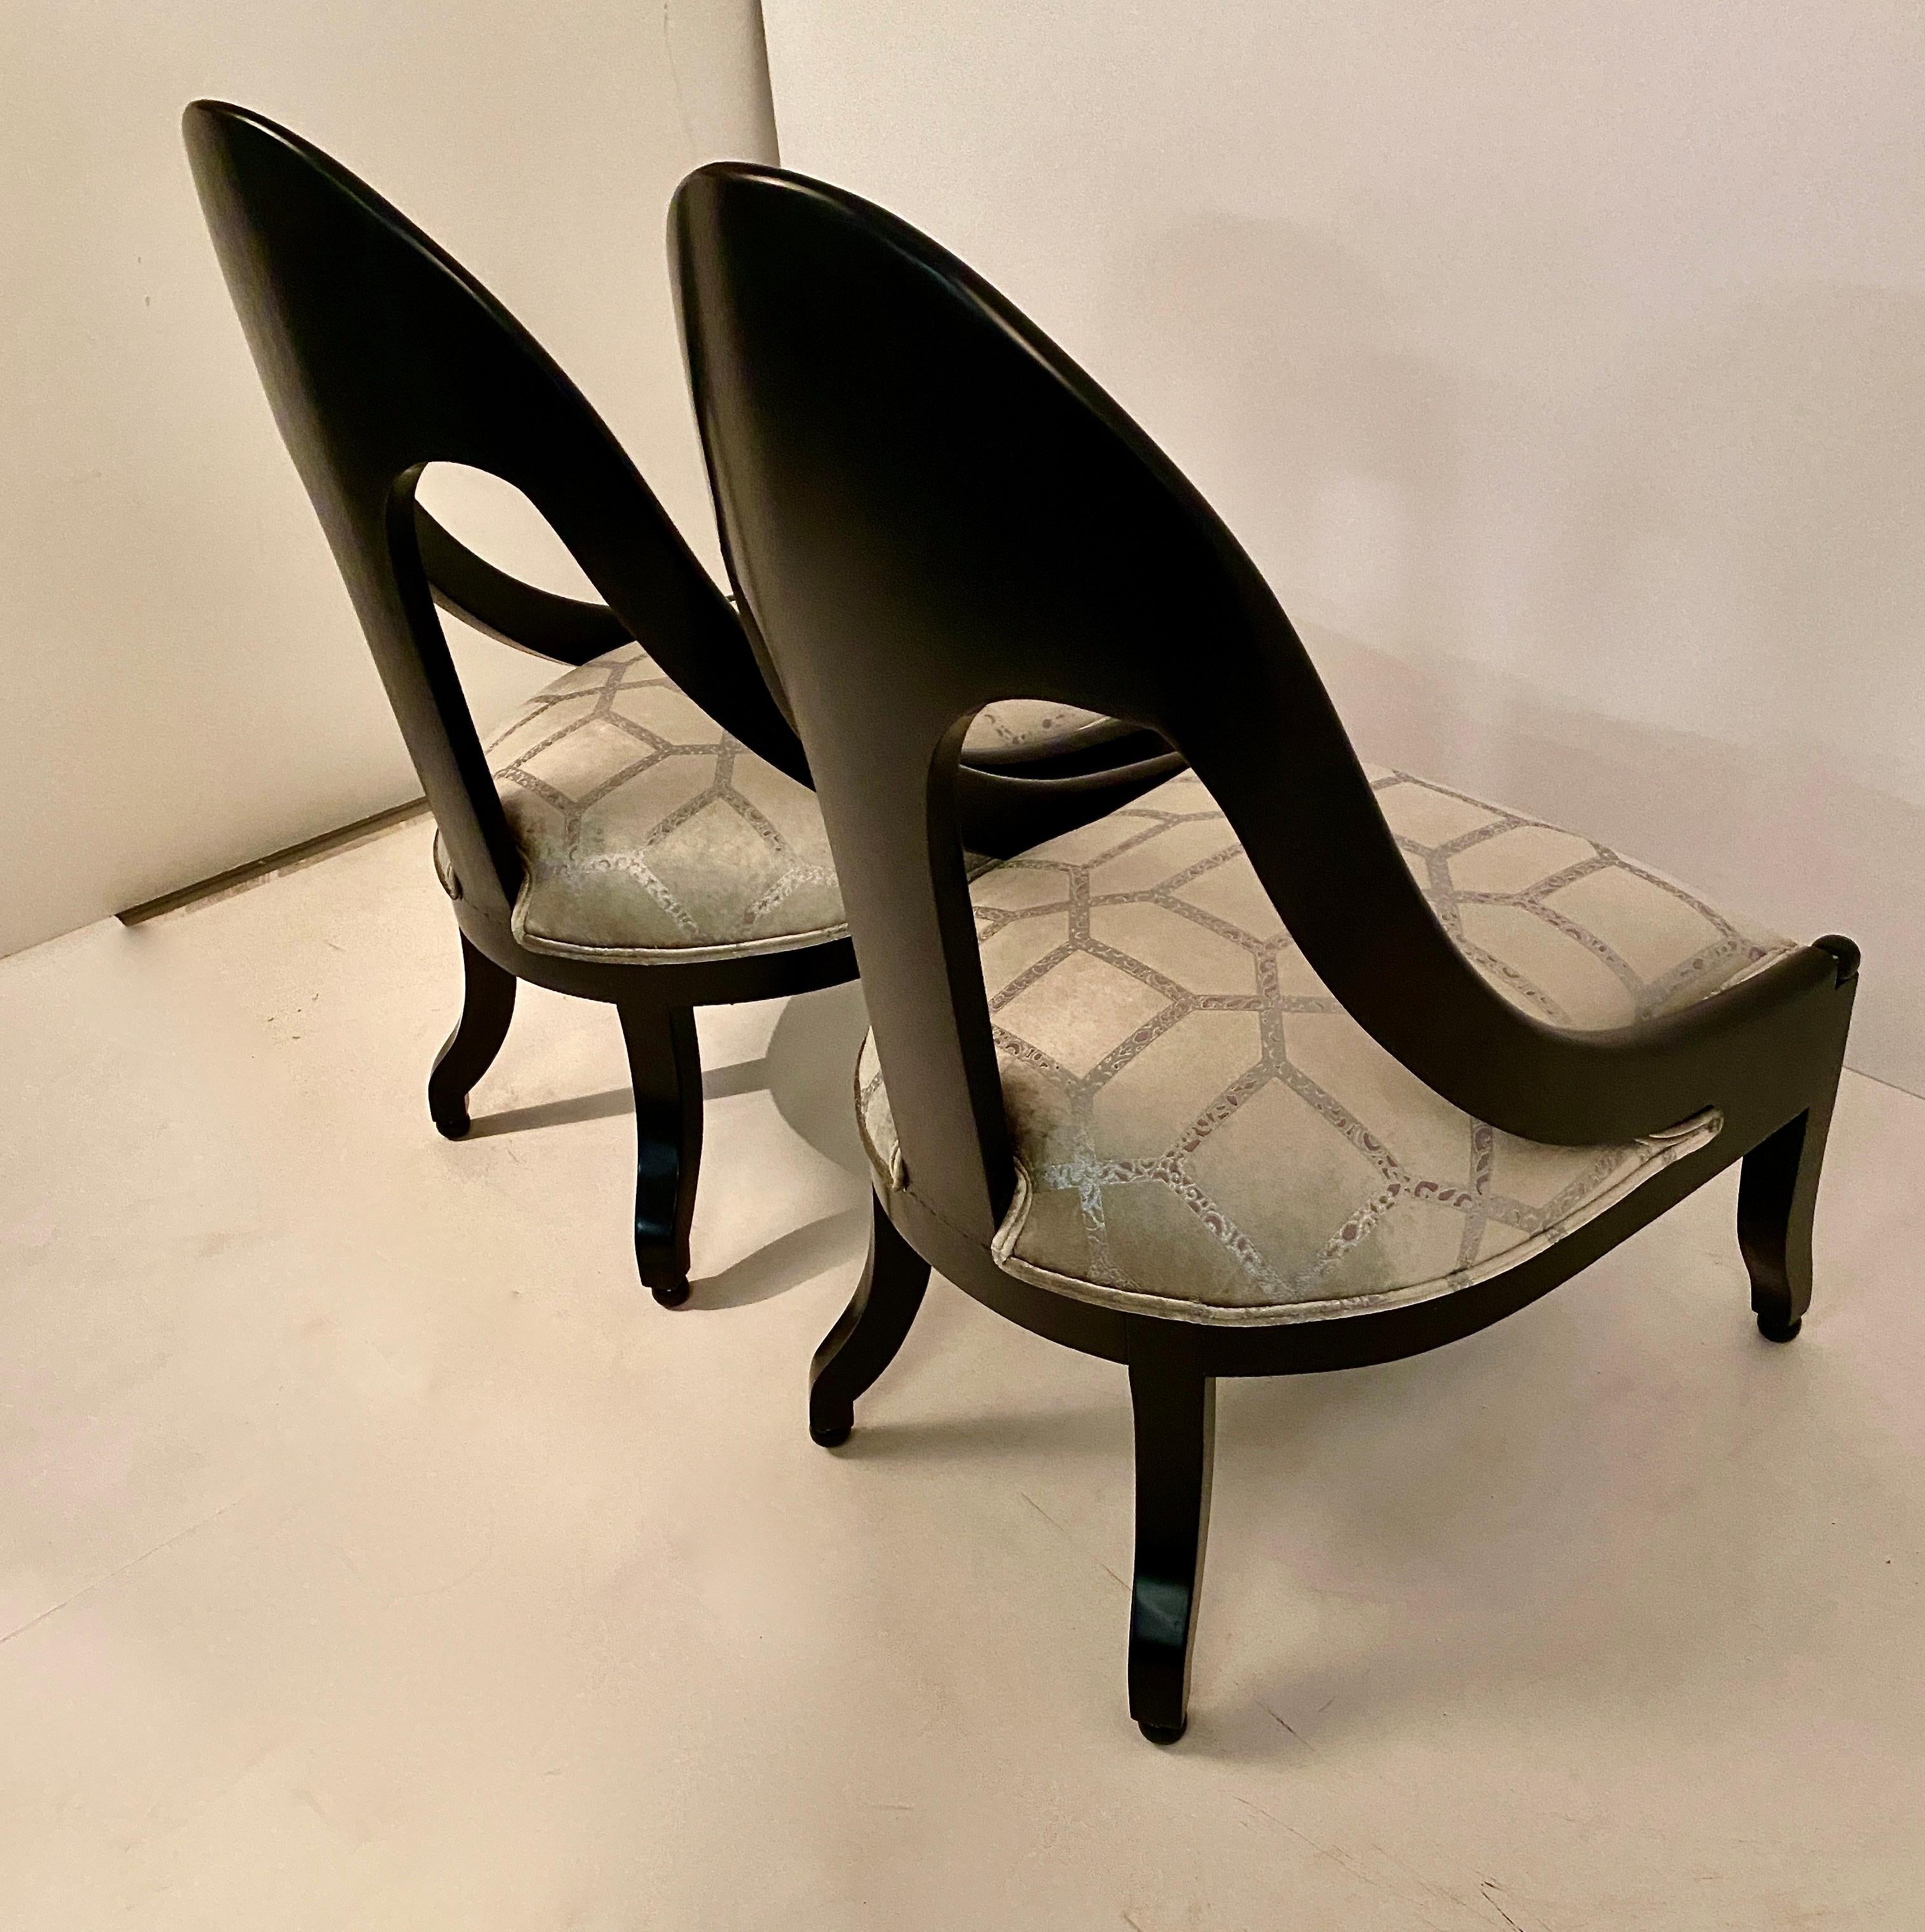 Mid-20th Century Pair of Spoon Back Slipper Chairs in Black Satin Lacquer